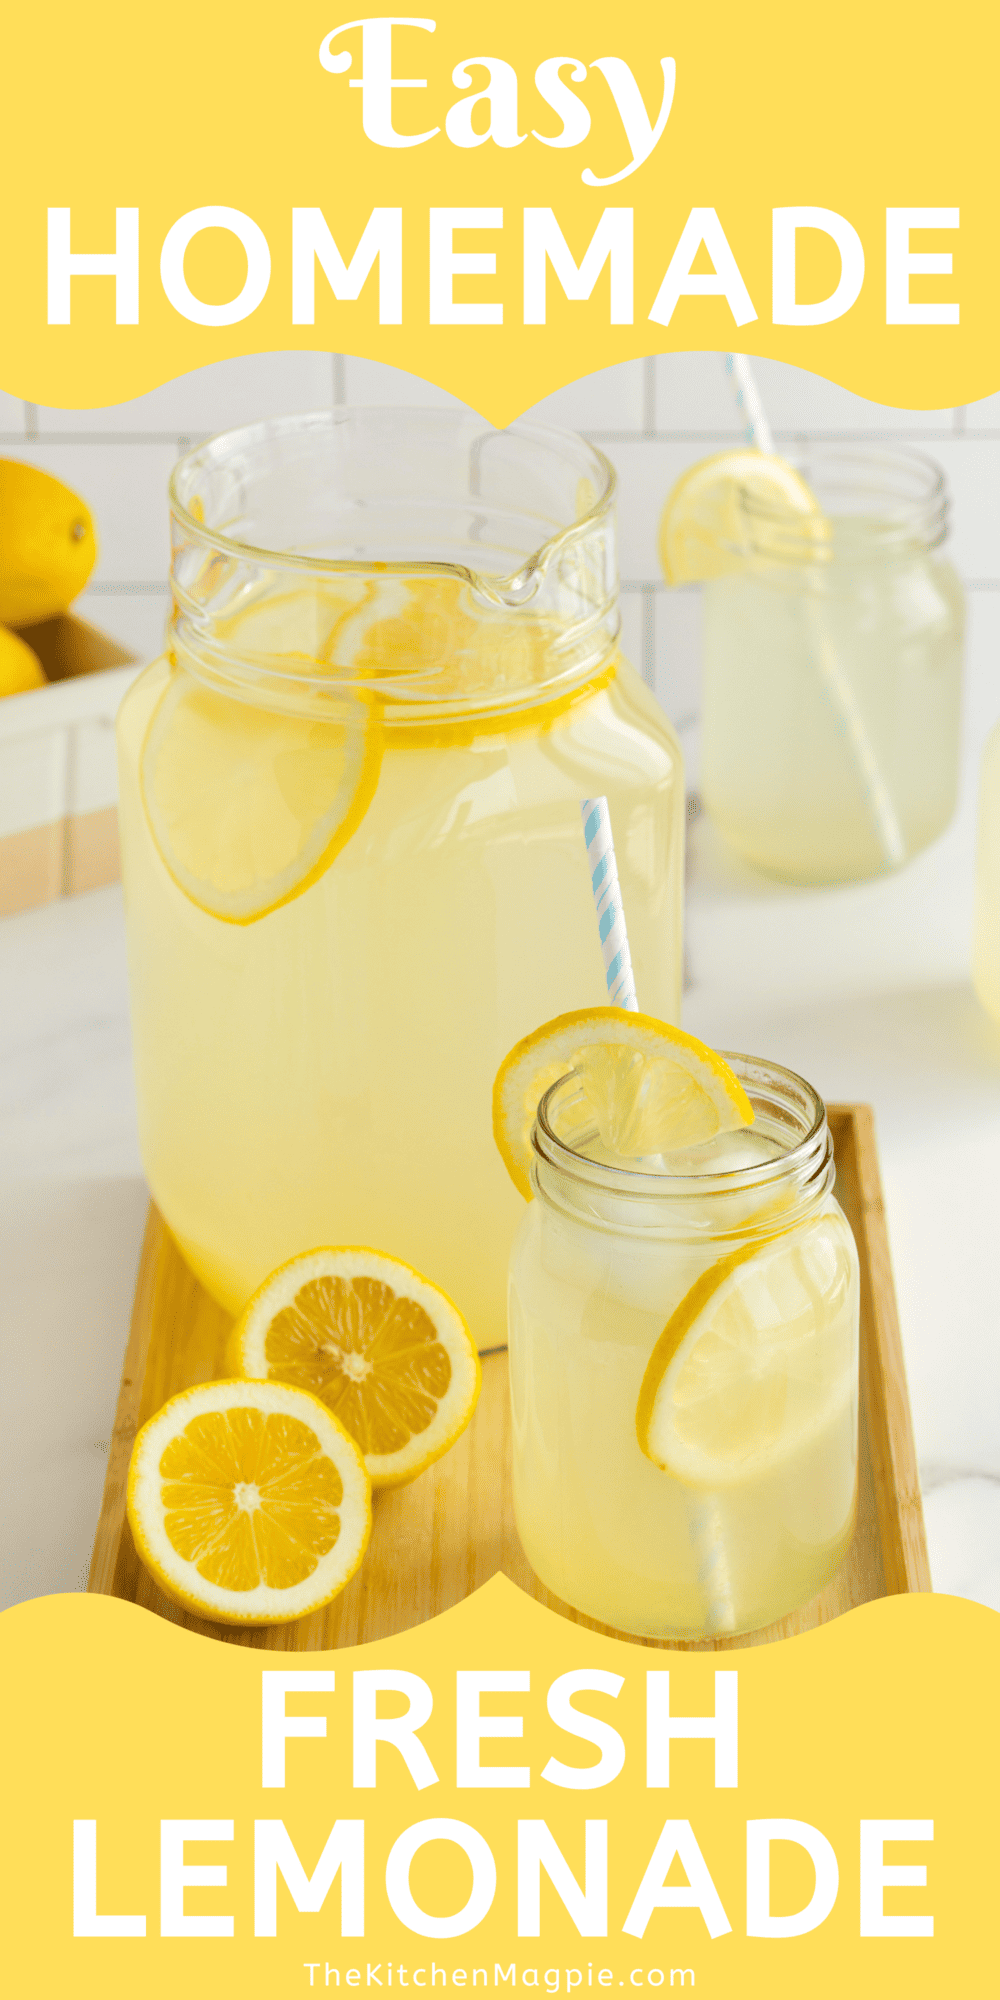 This easy and fresh homemade lemonade is a snap to make for a refreshing drink on a hot summer day!